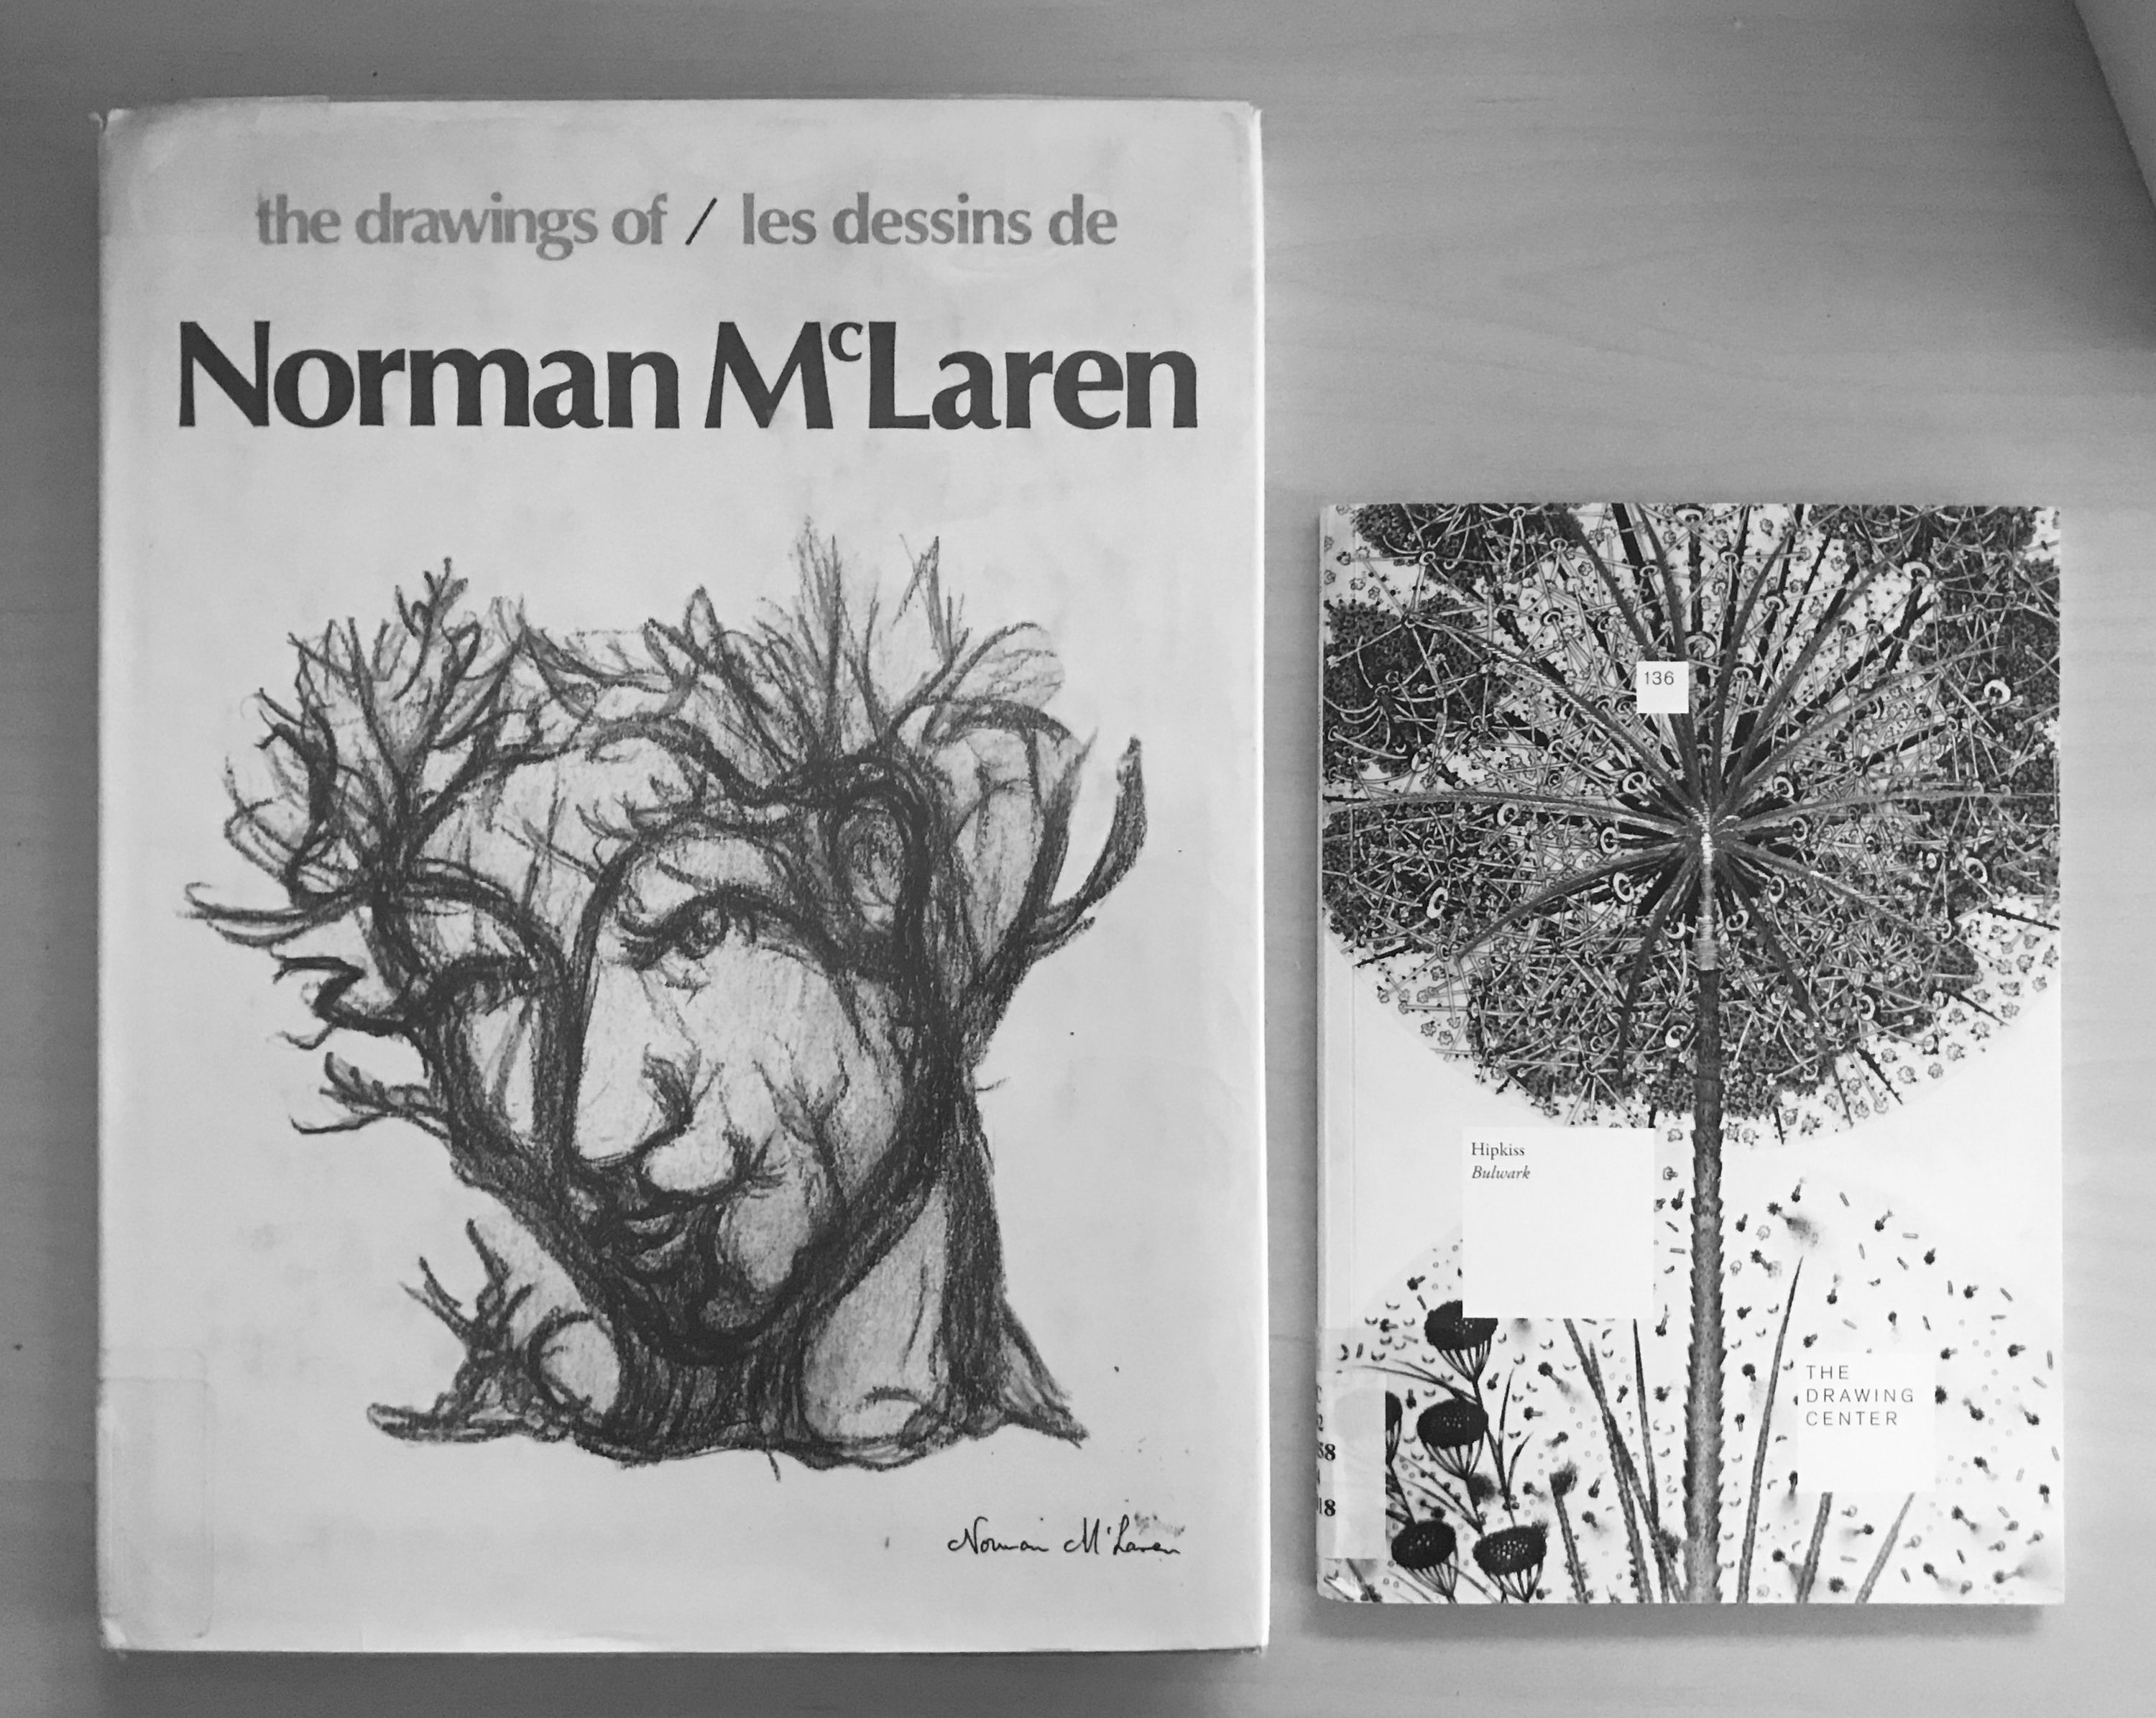 image of the covers of the two books